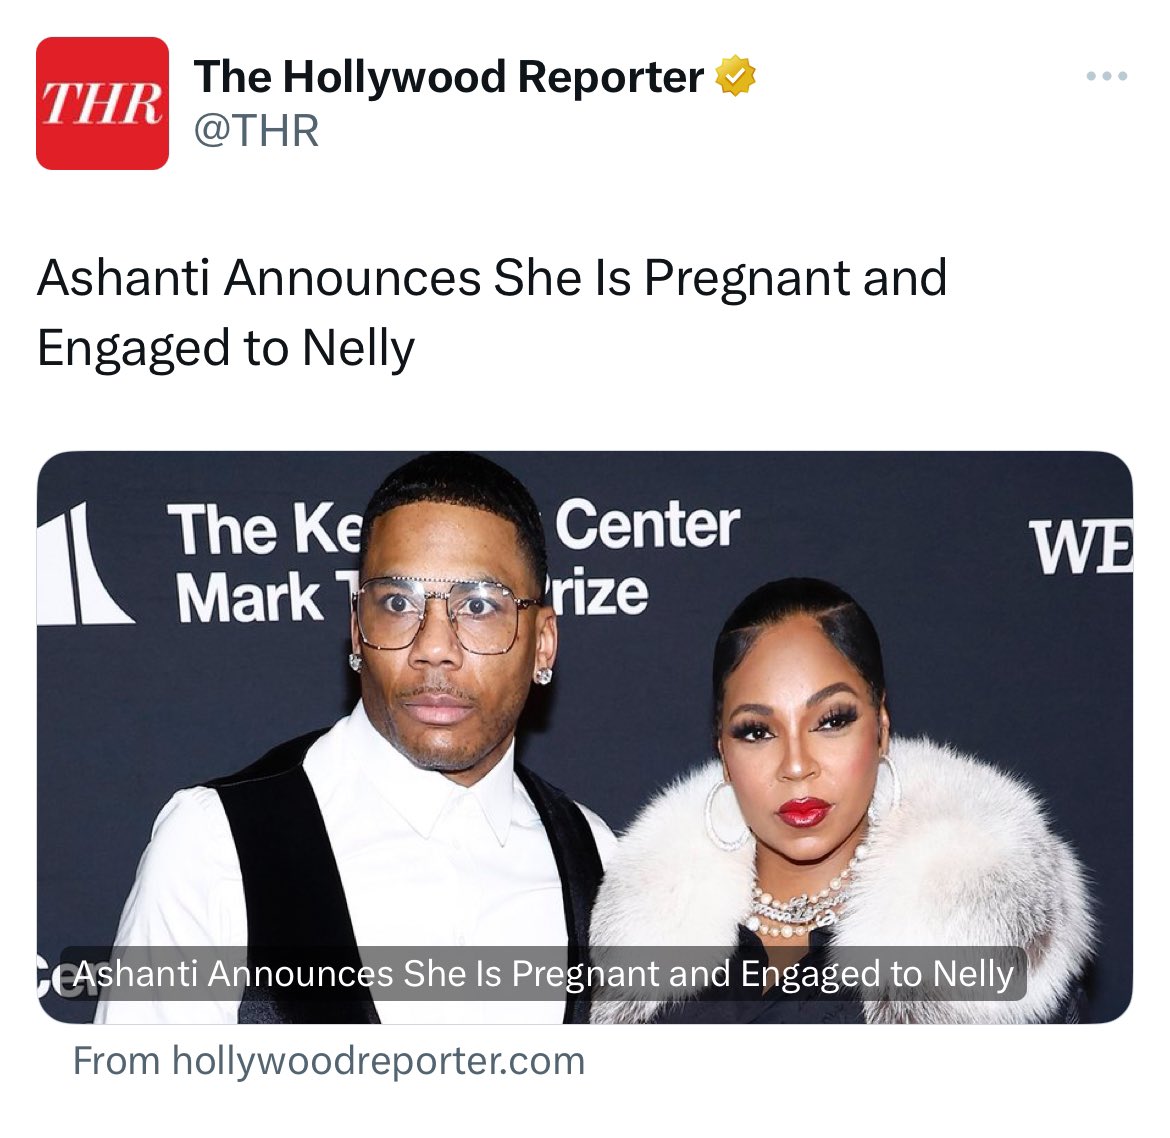 this photo makes it look like Ashanti just told Nelly both of these things two seconds earlier